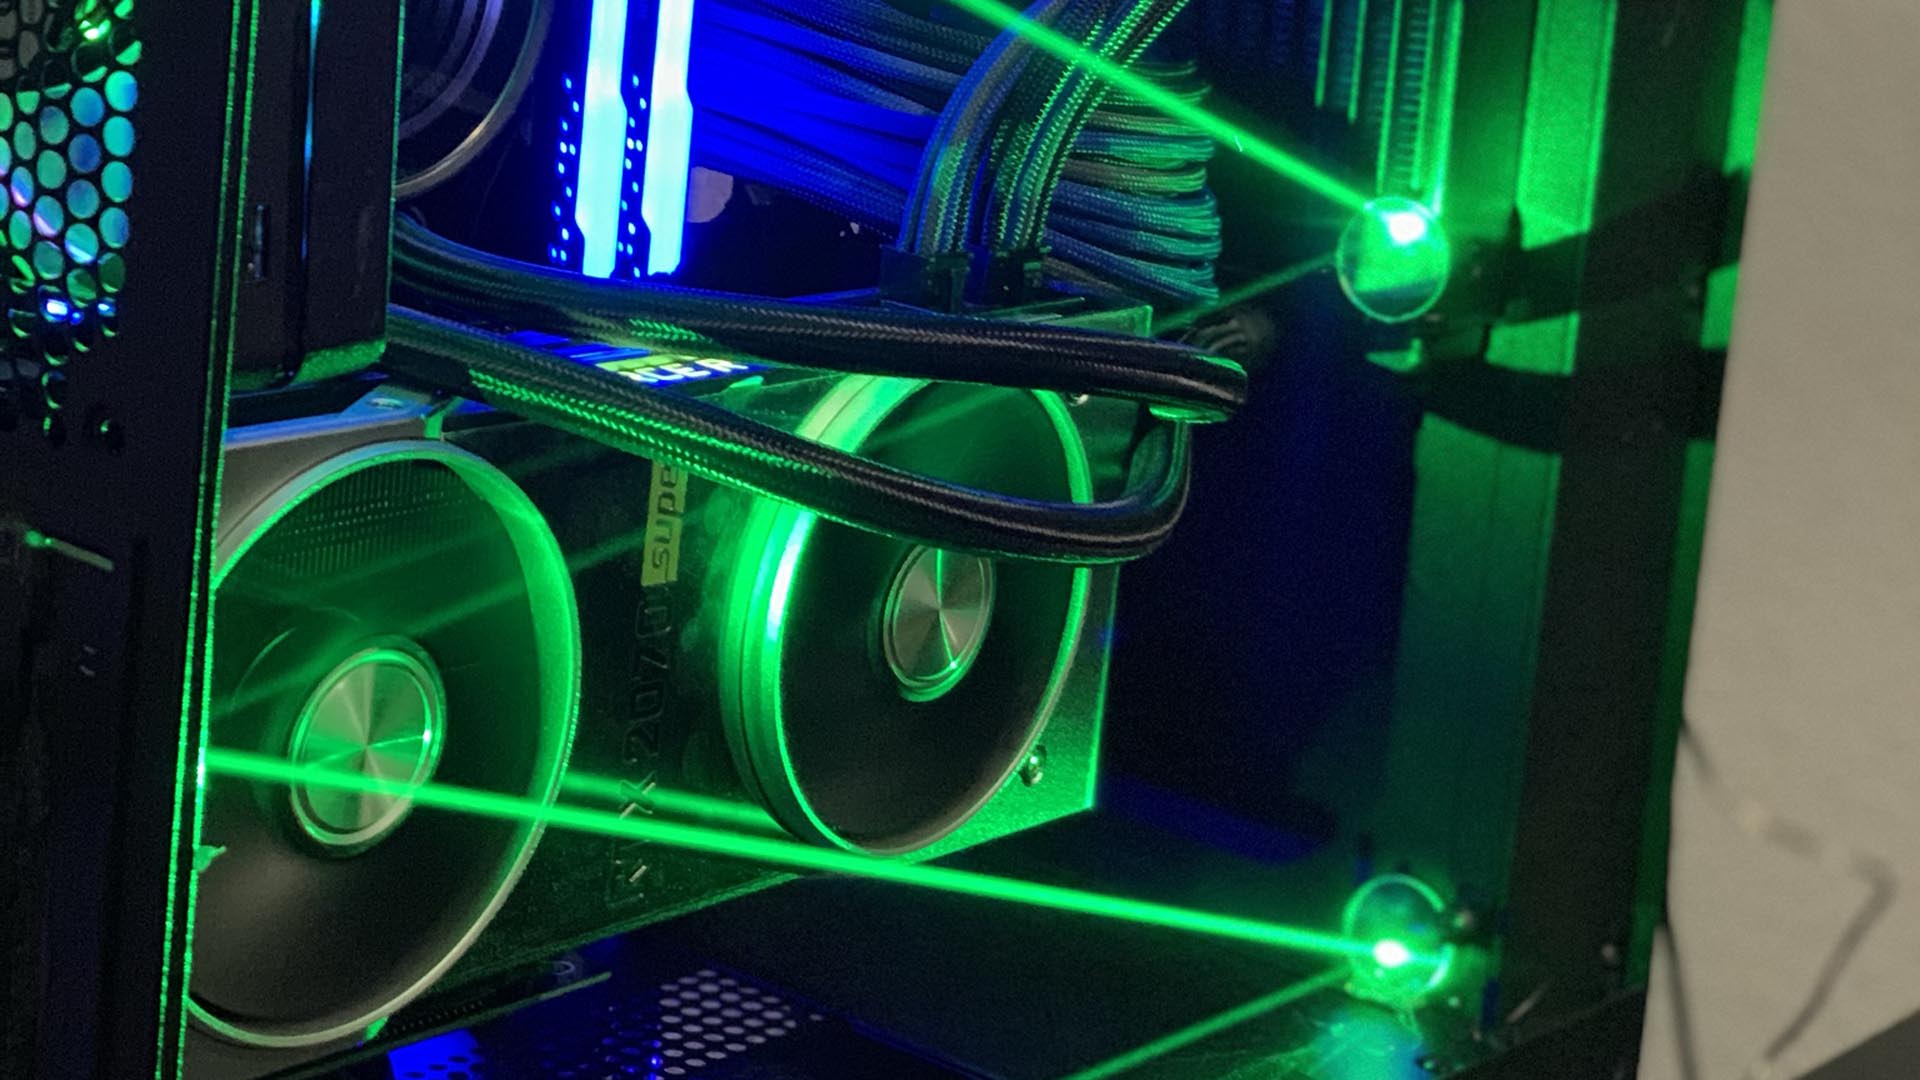 Forget RGB case mods, PC gaming is all about (safe) lasers now |